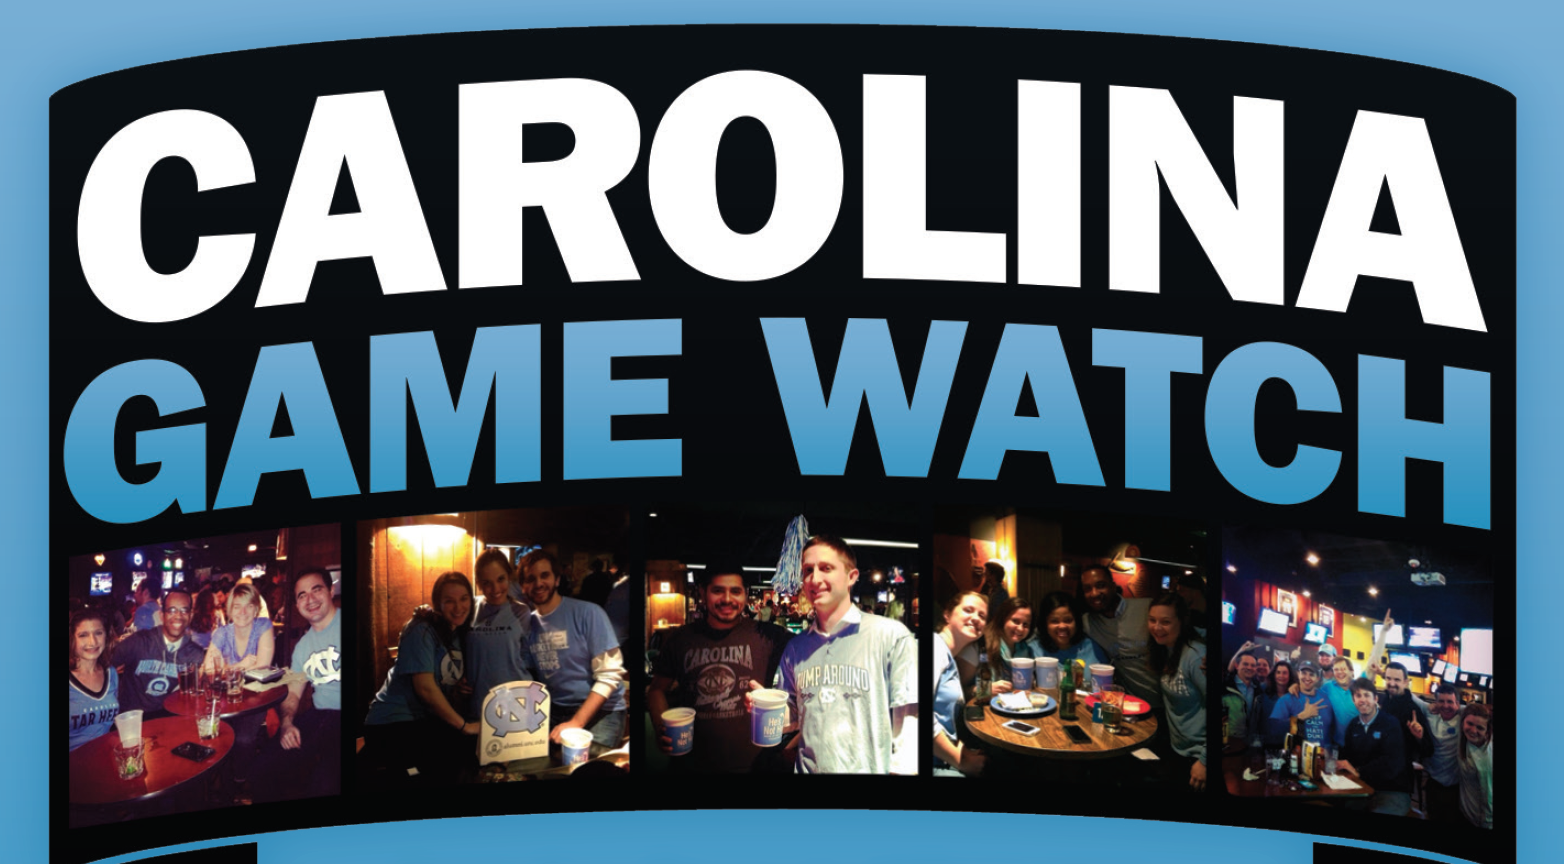 Catch a Gamewatch Party with our awesome Tar Heel neighbors, the New York Carolina Club!